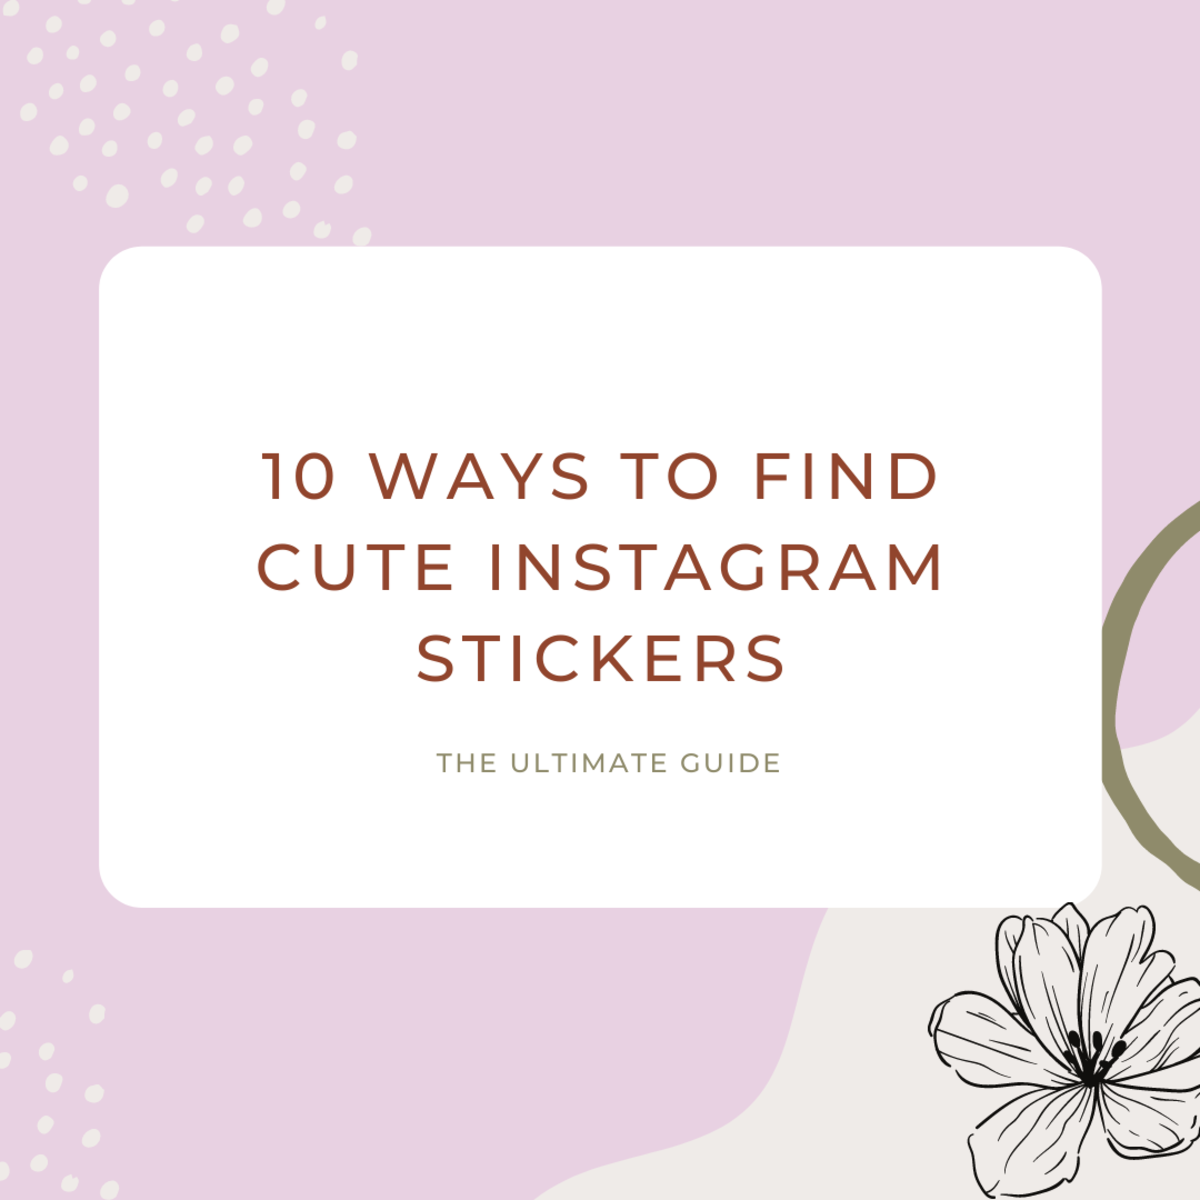 In this guide, we're going to take a look at how to find cute Instagram stickers!